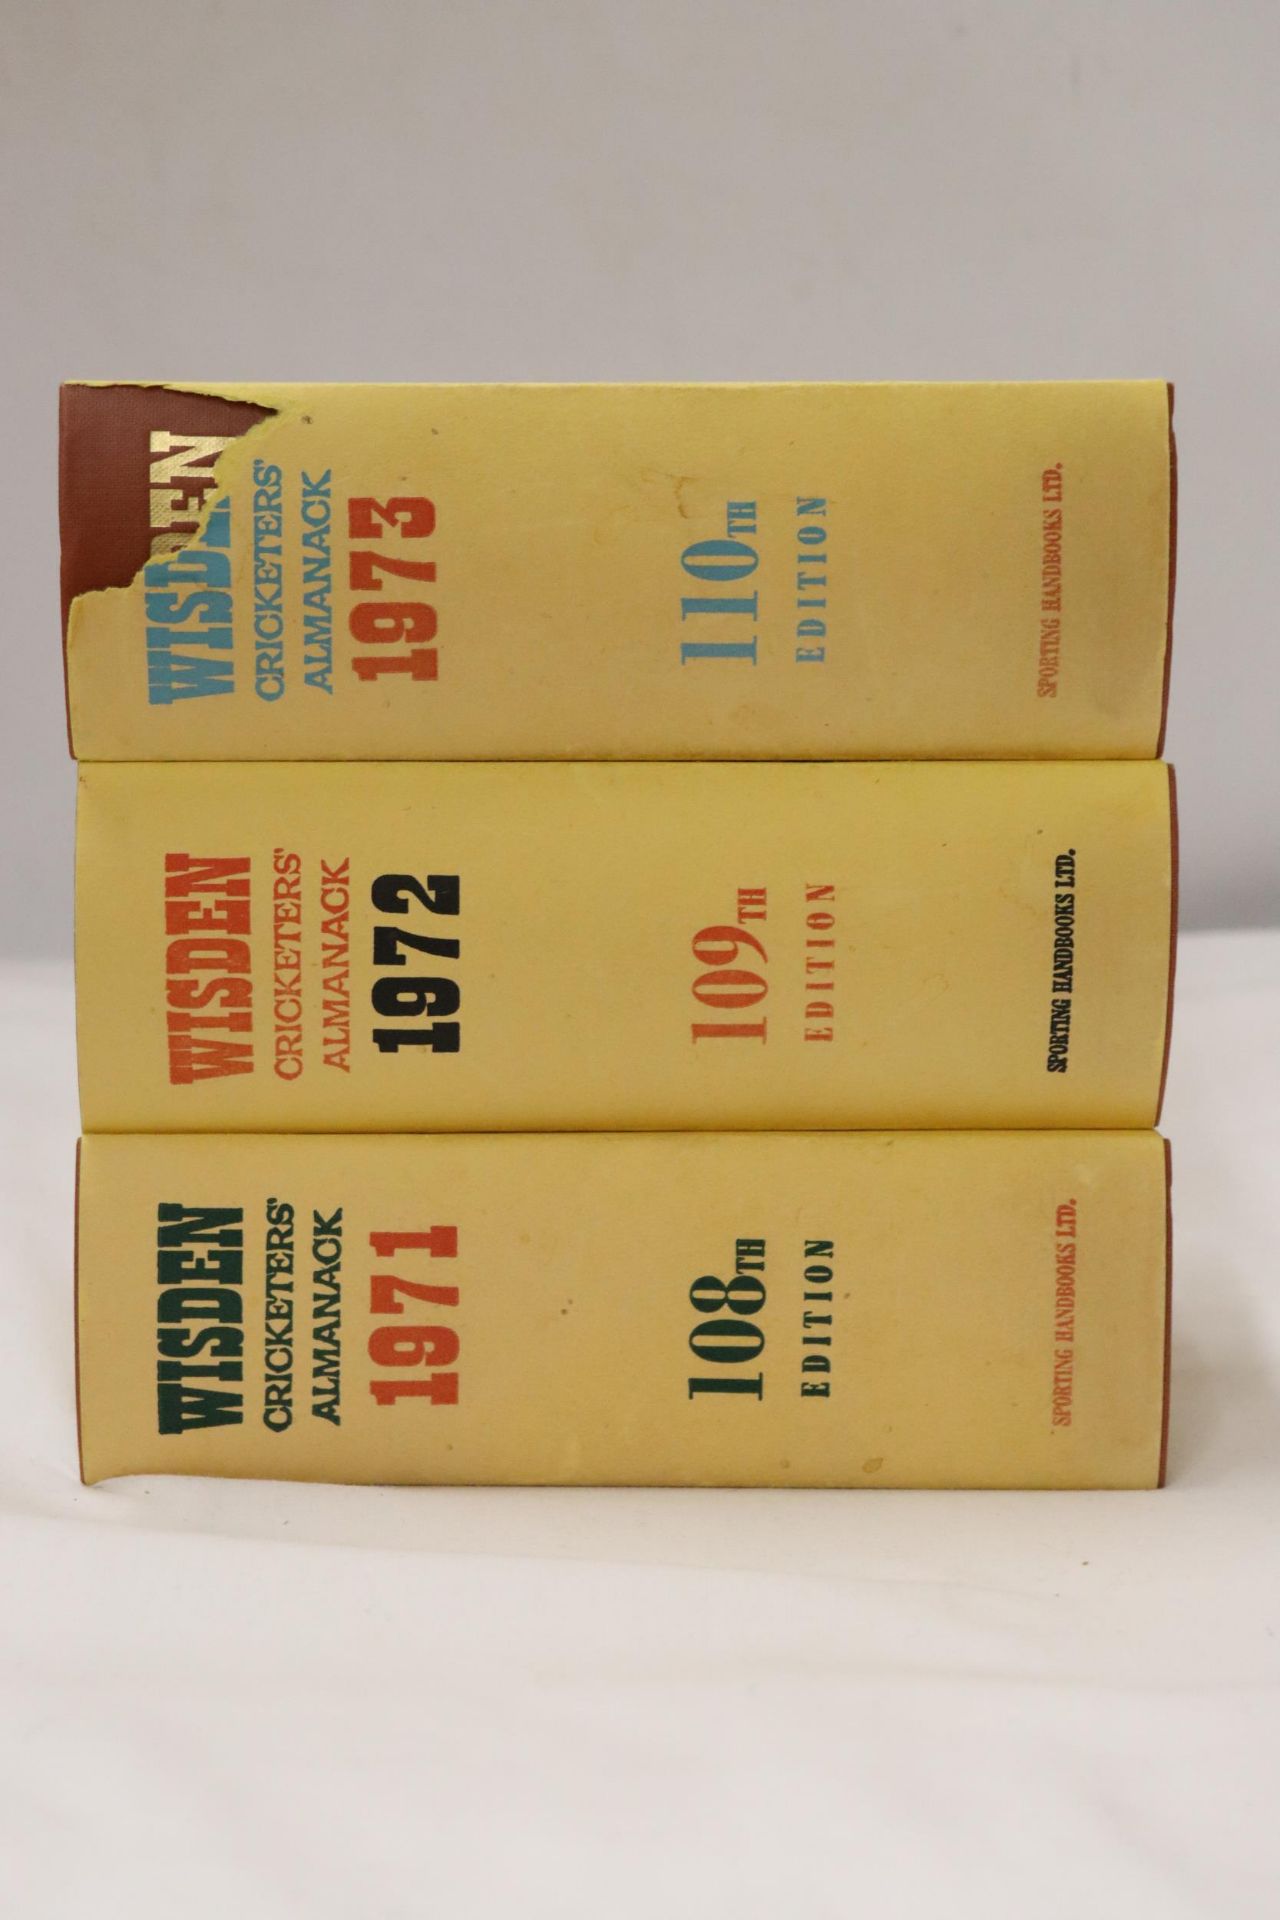 THREE HARDBACK COPIES OF WISDEN'S CRICKETER'S ALMANACKS, 1971. 1972 AND 1973. THESE COPIES ARE IN - Image 2 of 3